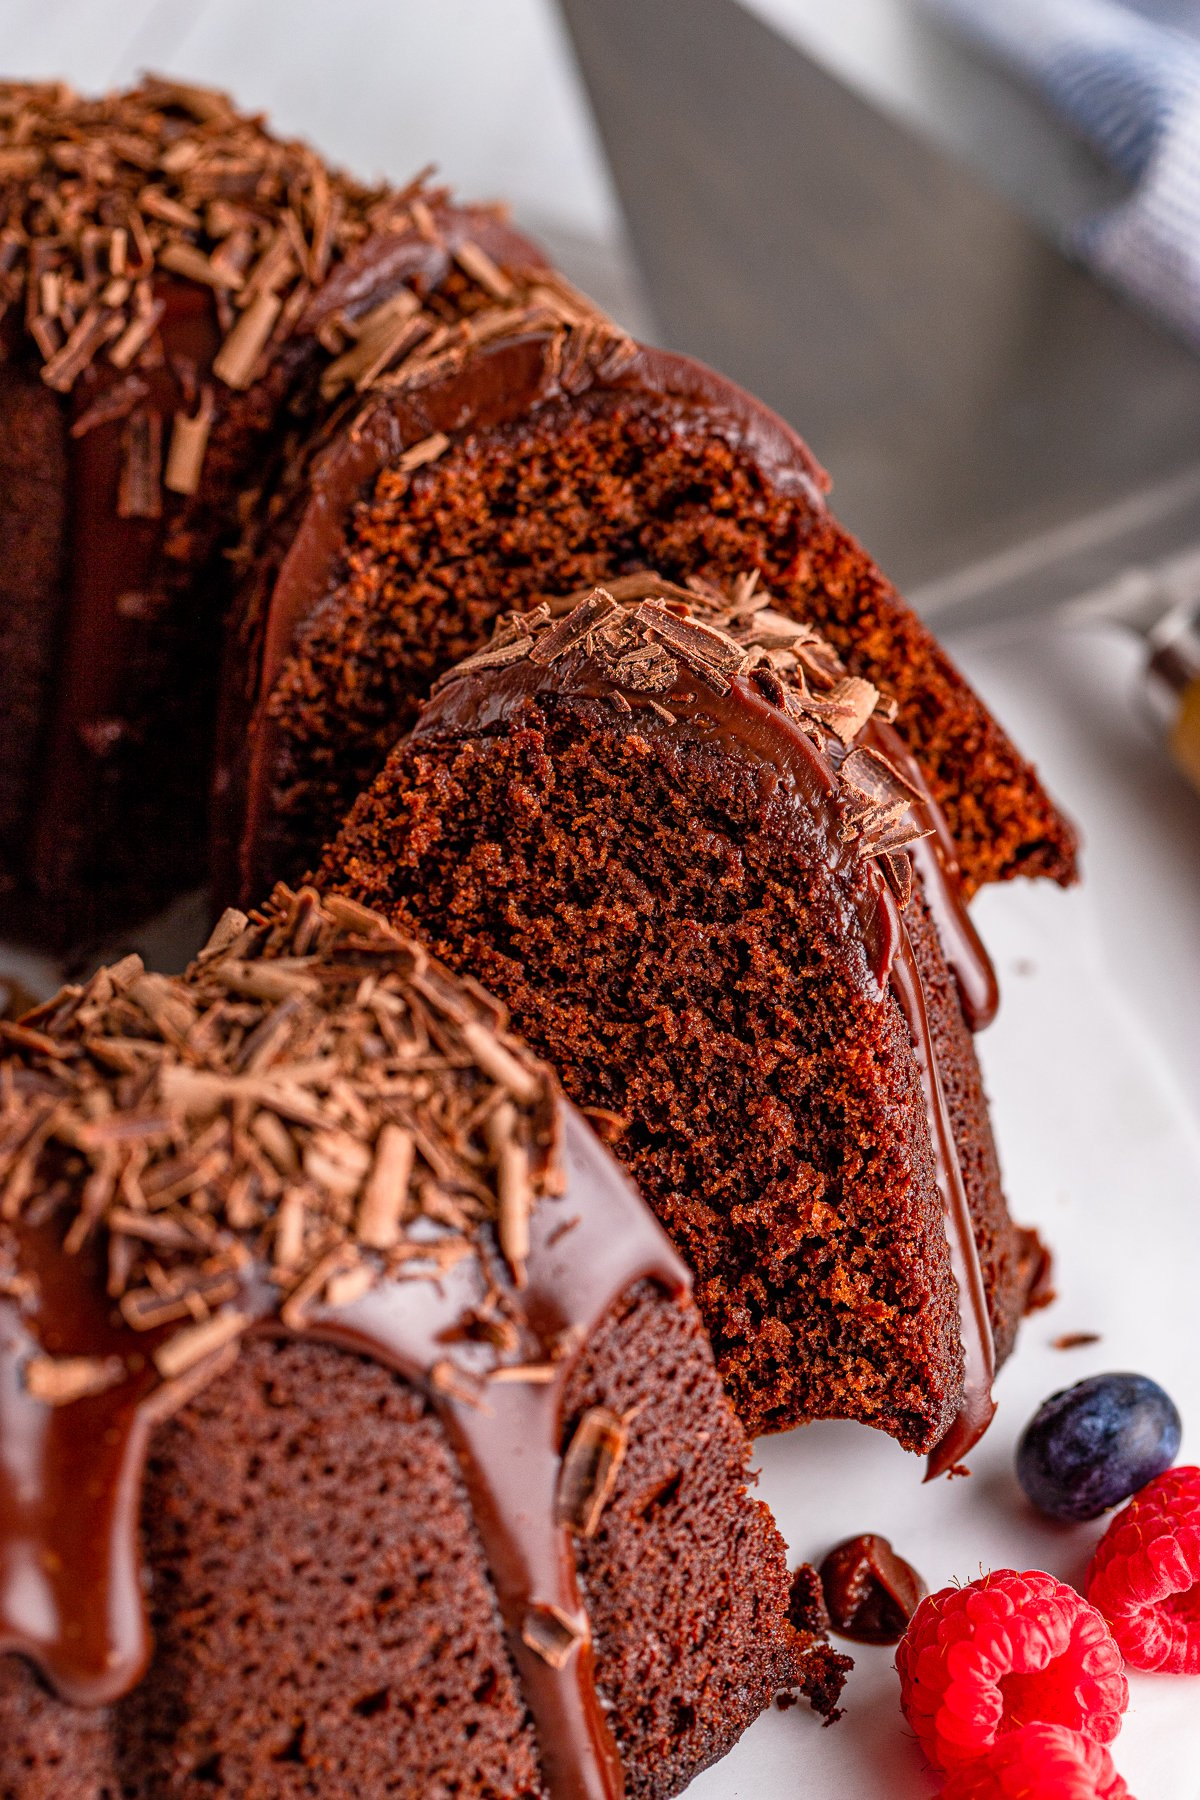 Chocolate Bundt Cake sliced with layers laying on other slices of cake.